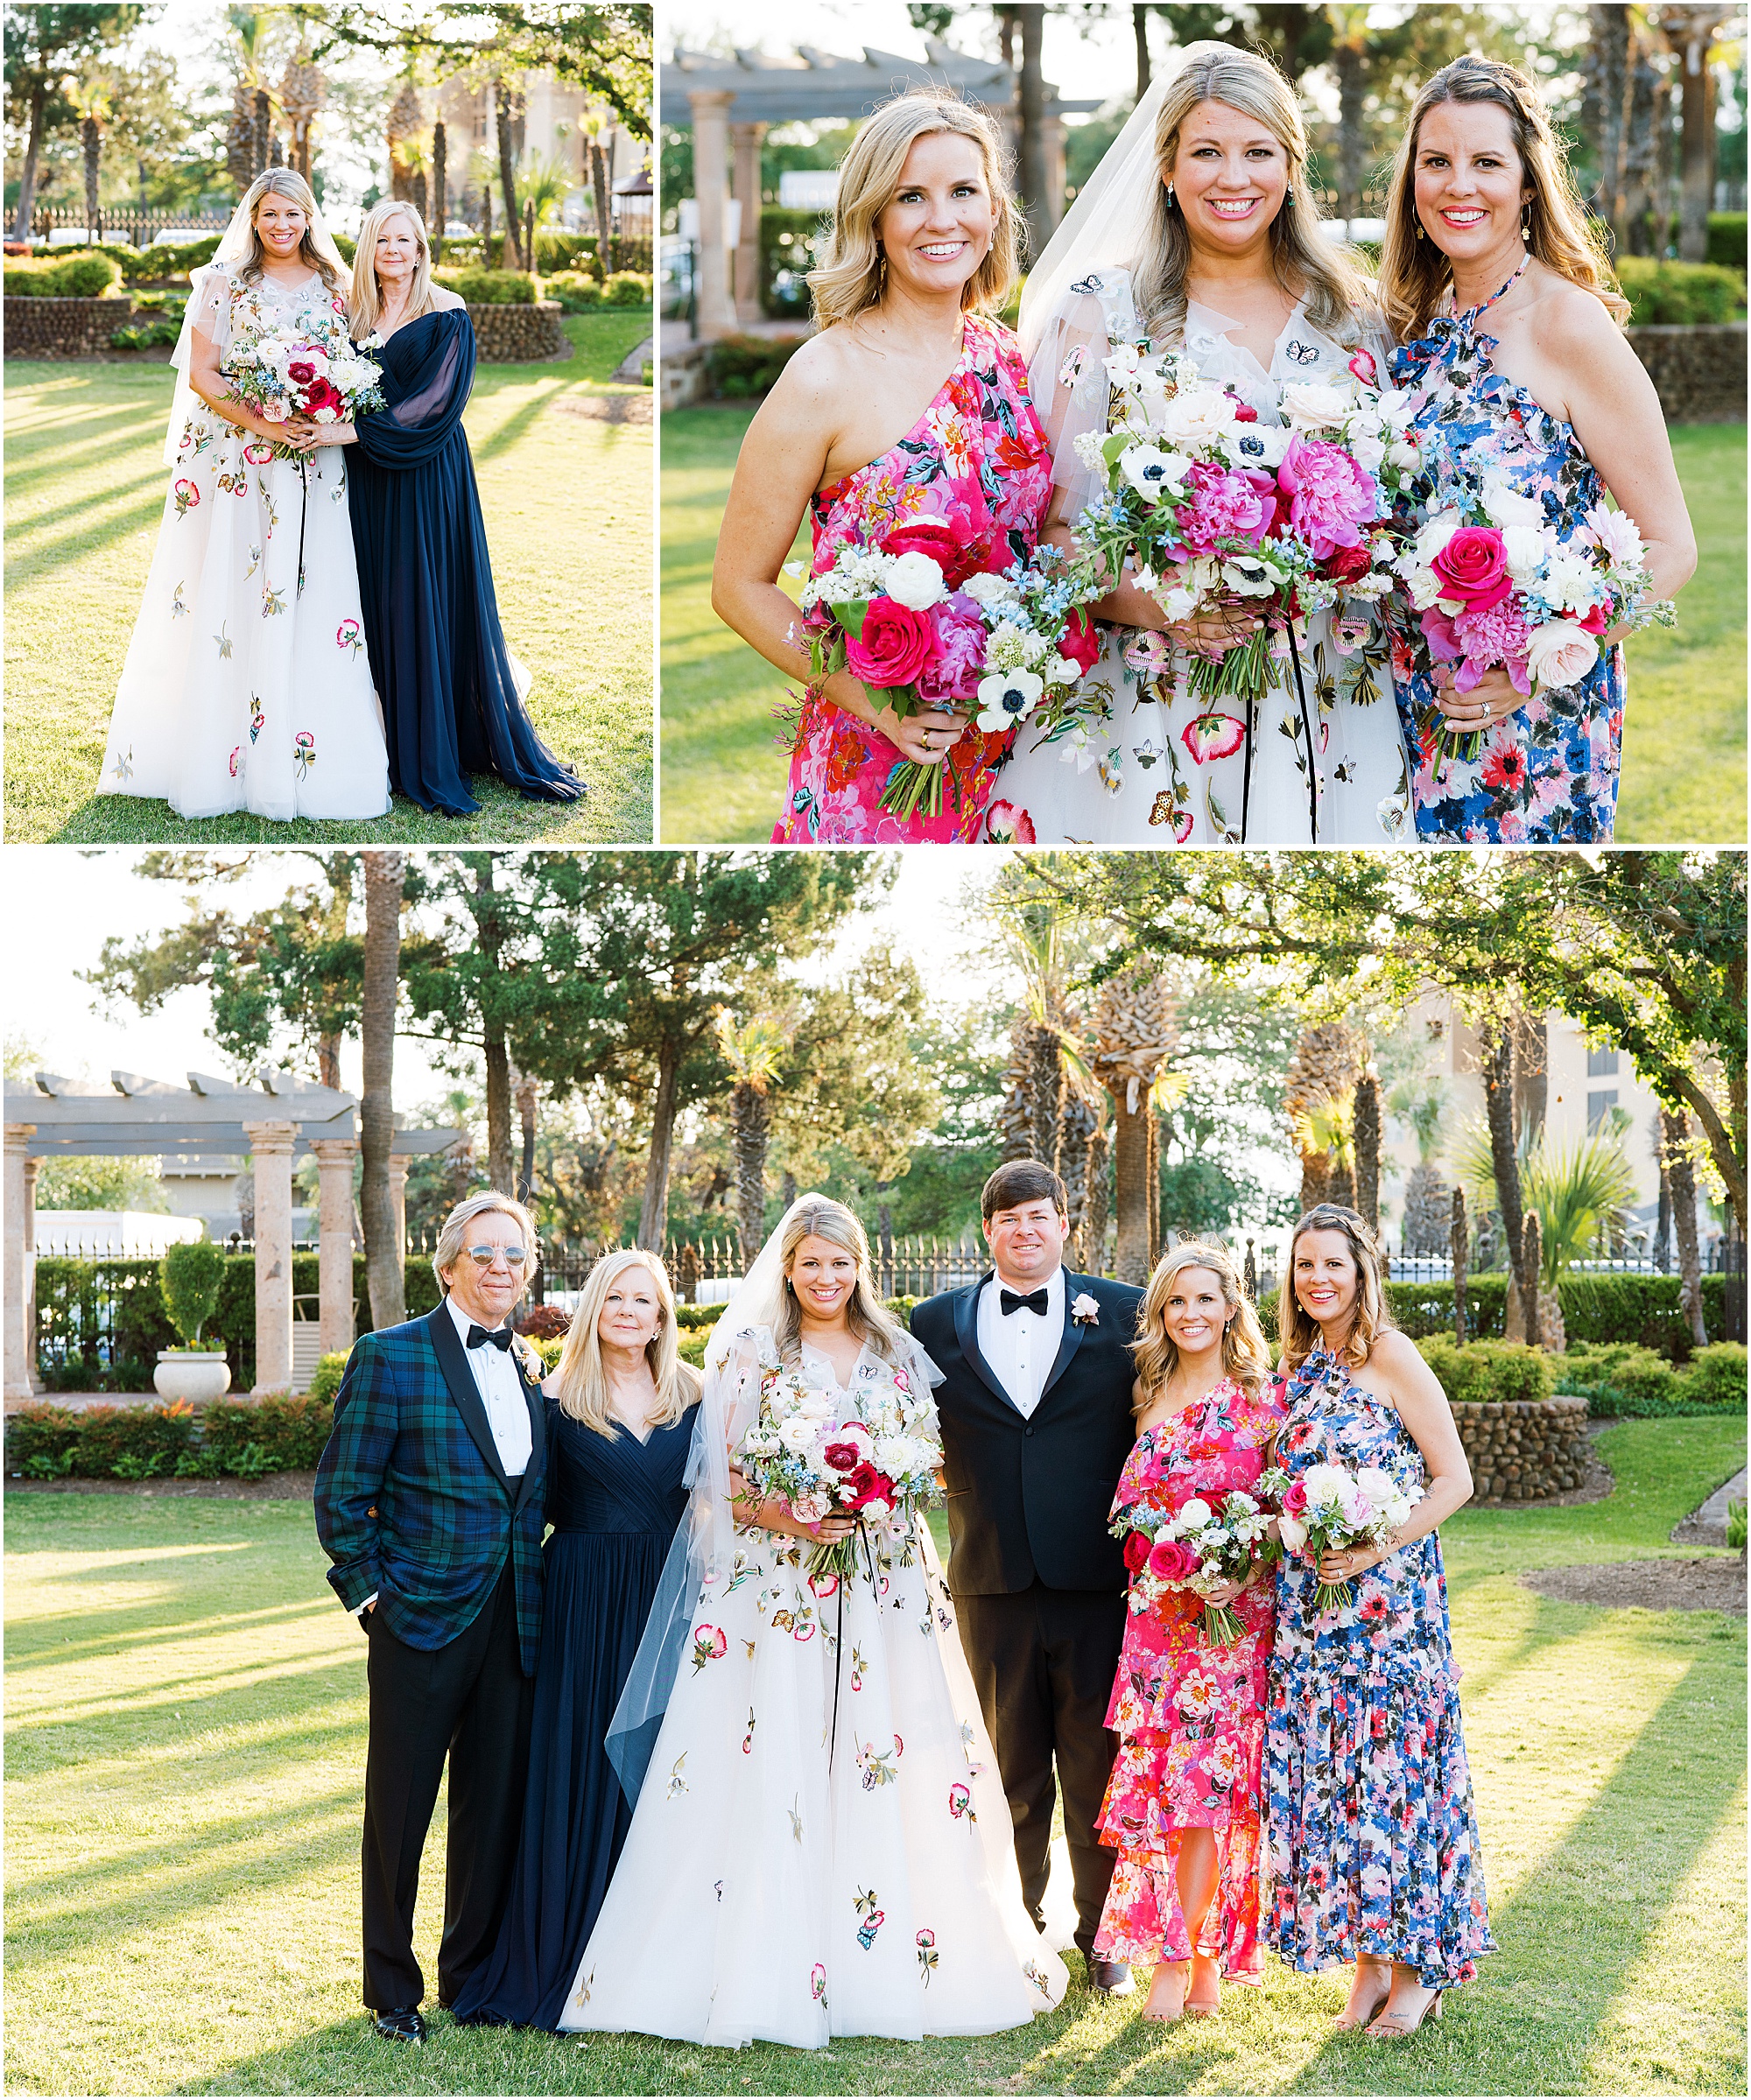 Bride in Monique Lhuillier with groom wearing a black tux with brides family in colorful floral dresses